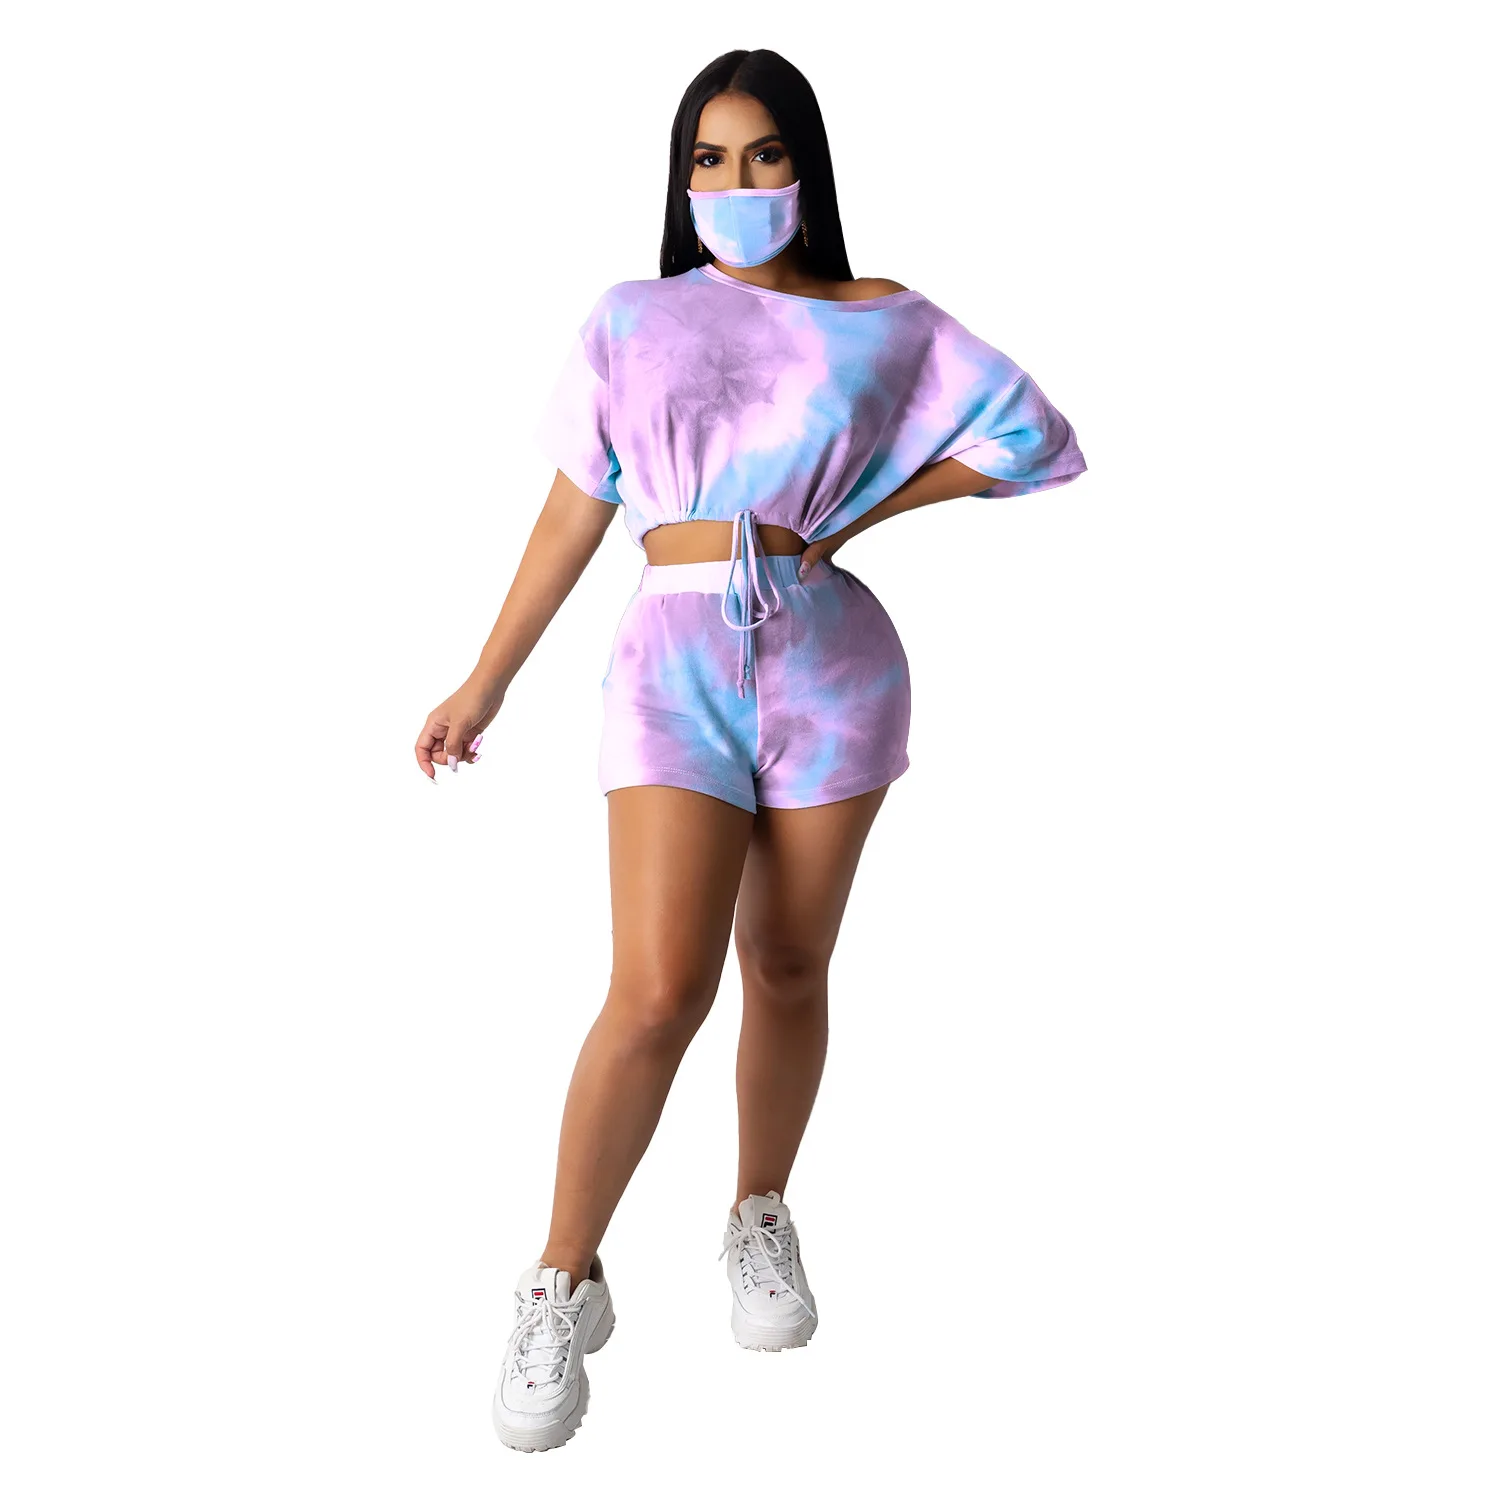 

2020 summer clothing 4colors rainbow tie die two piece bodycon bandage ladies outfit short romper crop top two piece sets, 3 different color